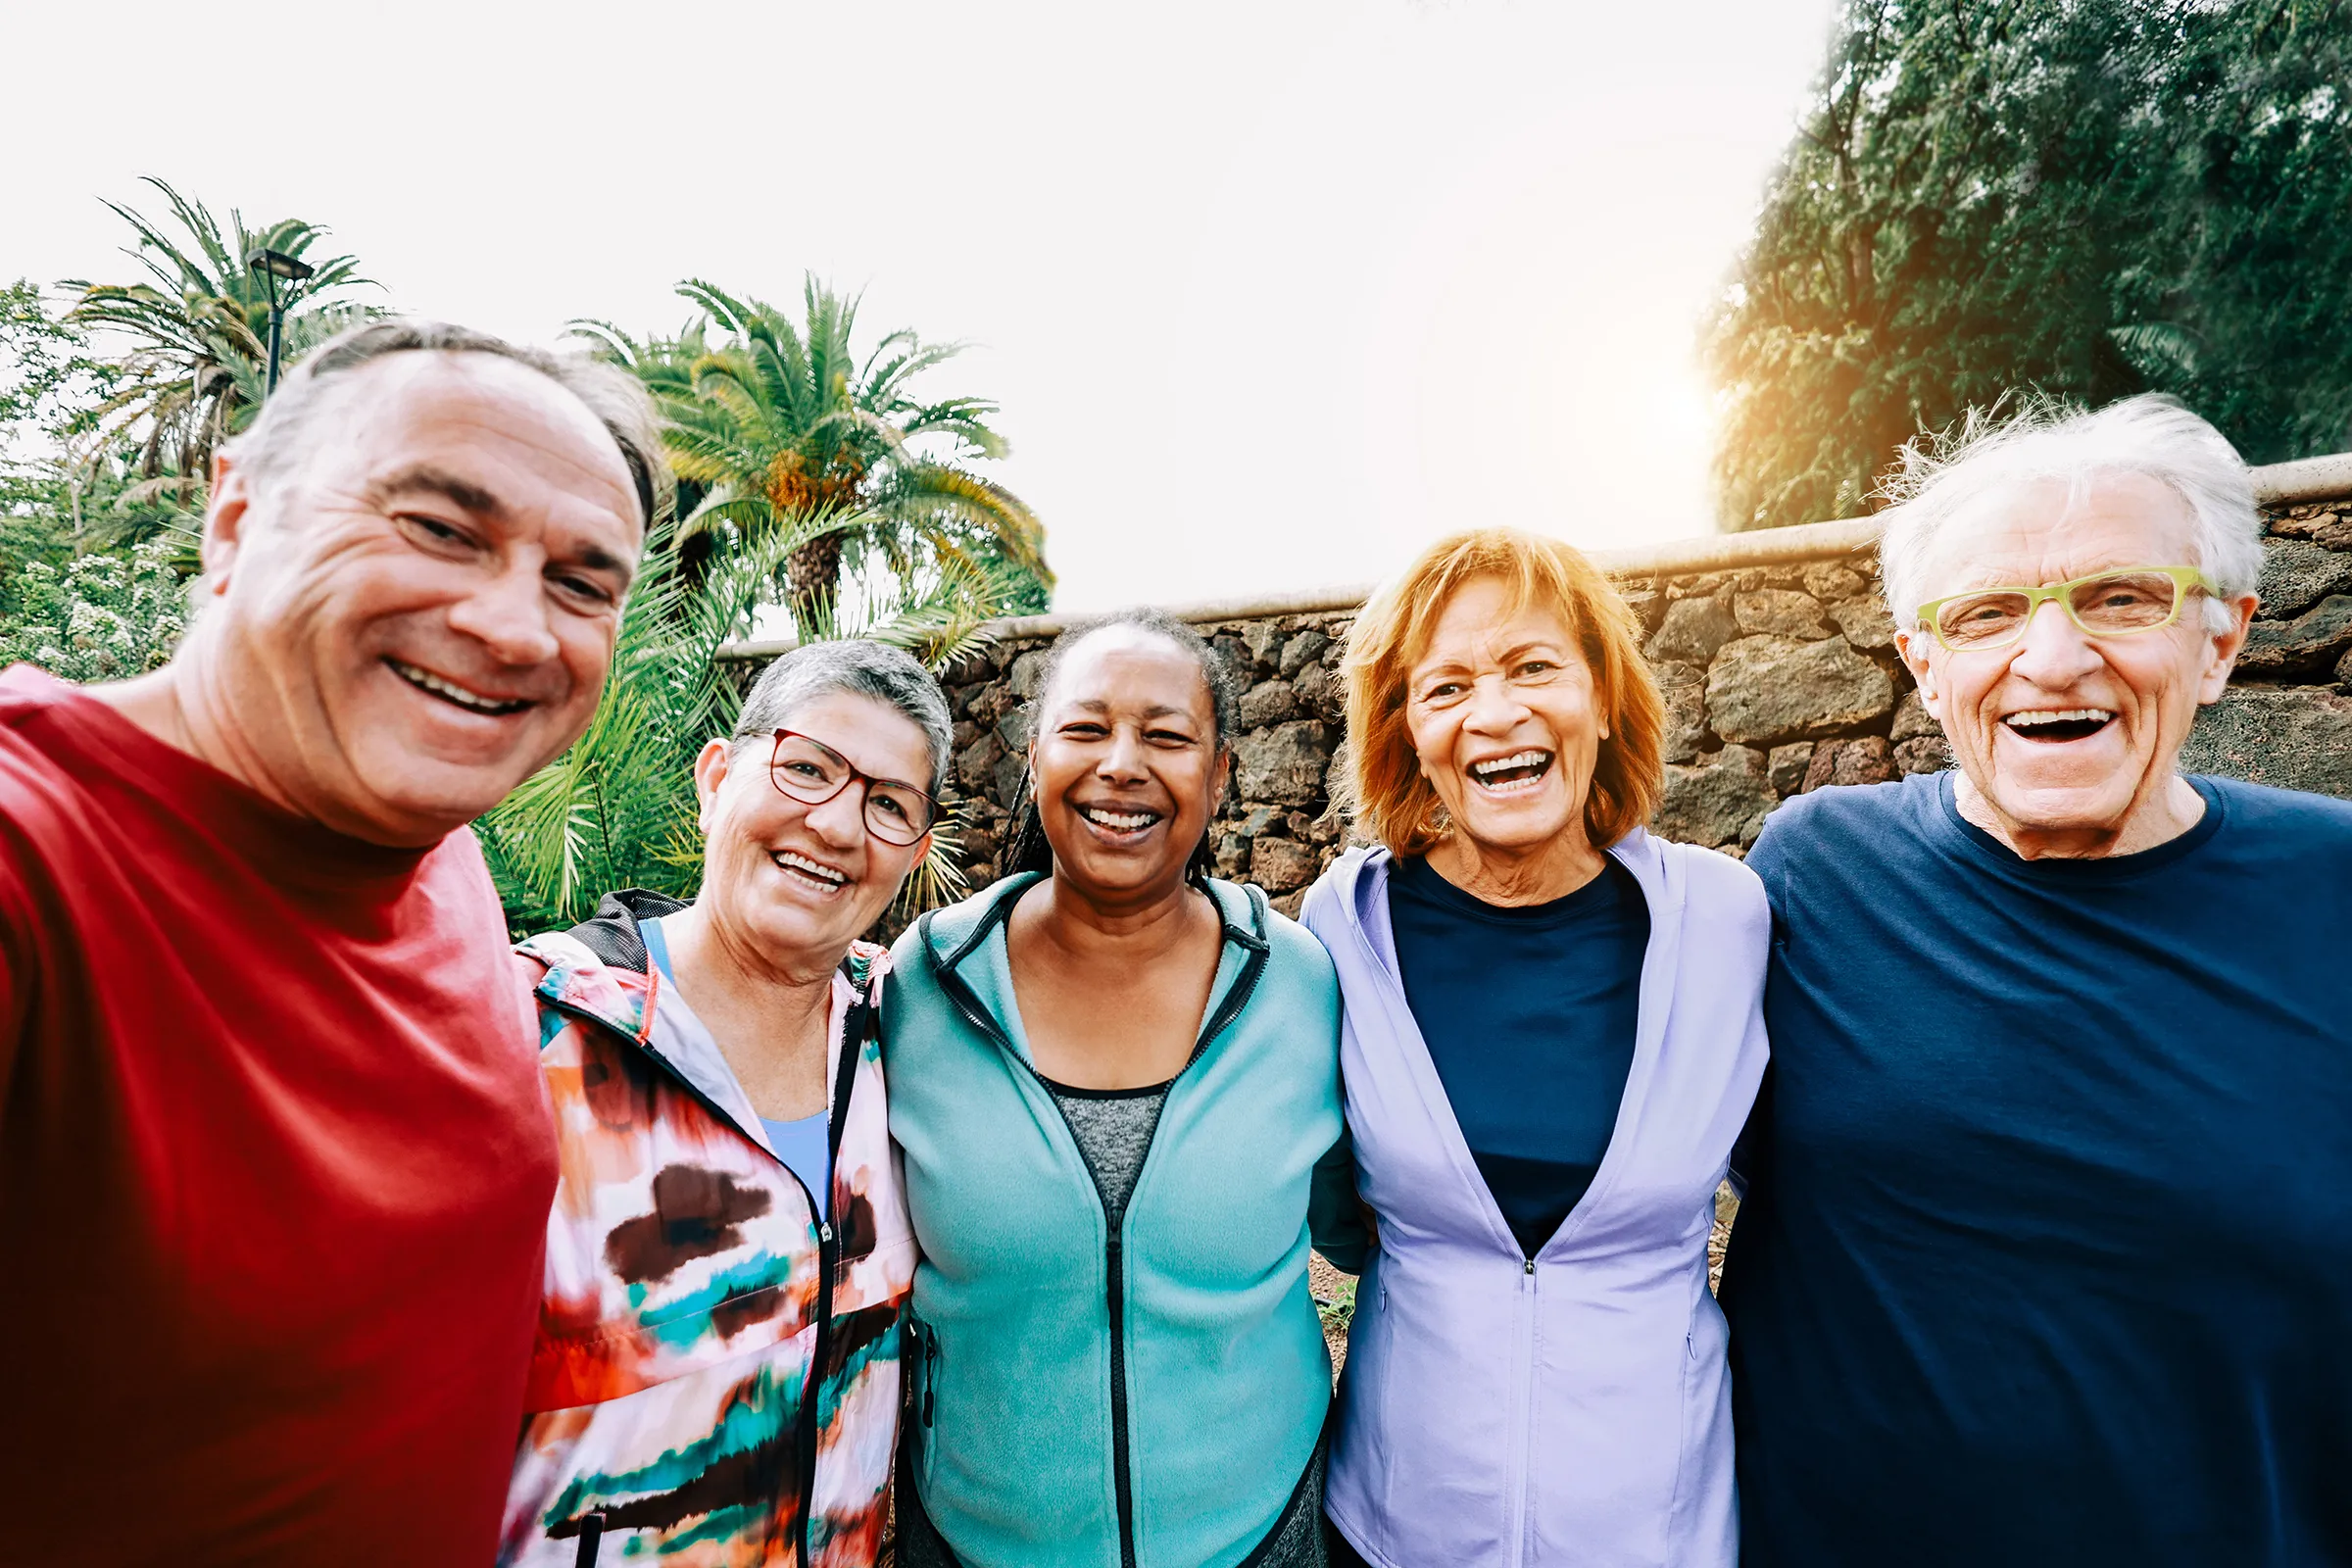 group of senior citizens outside smiling in front of stone wall and palm trees